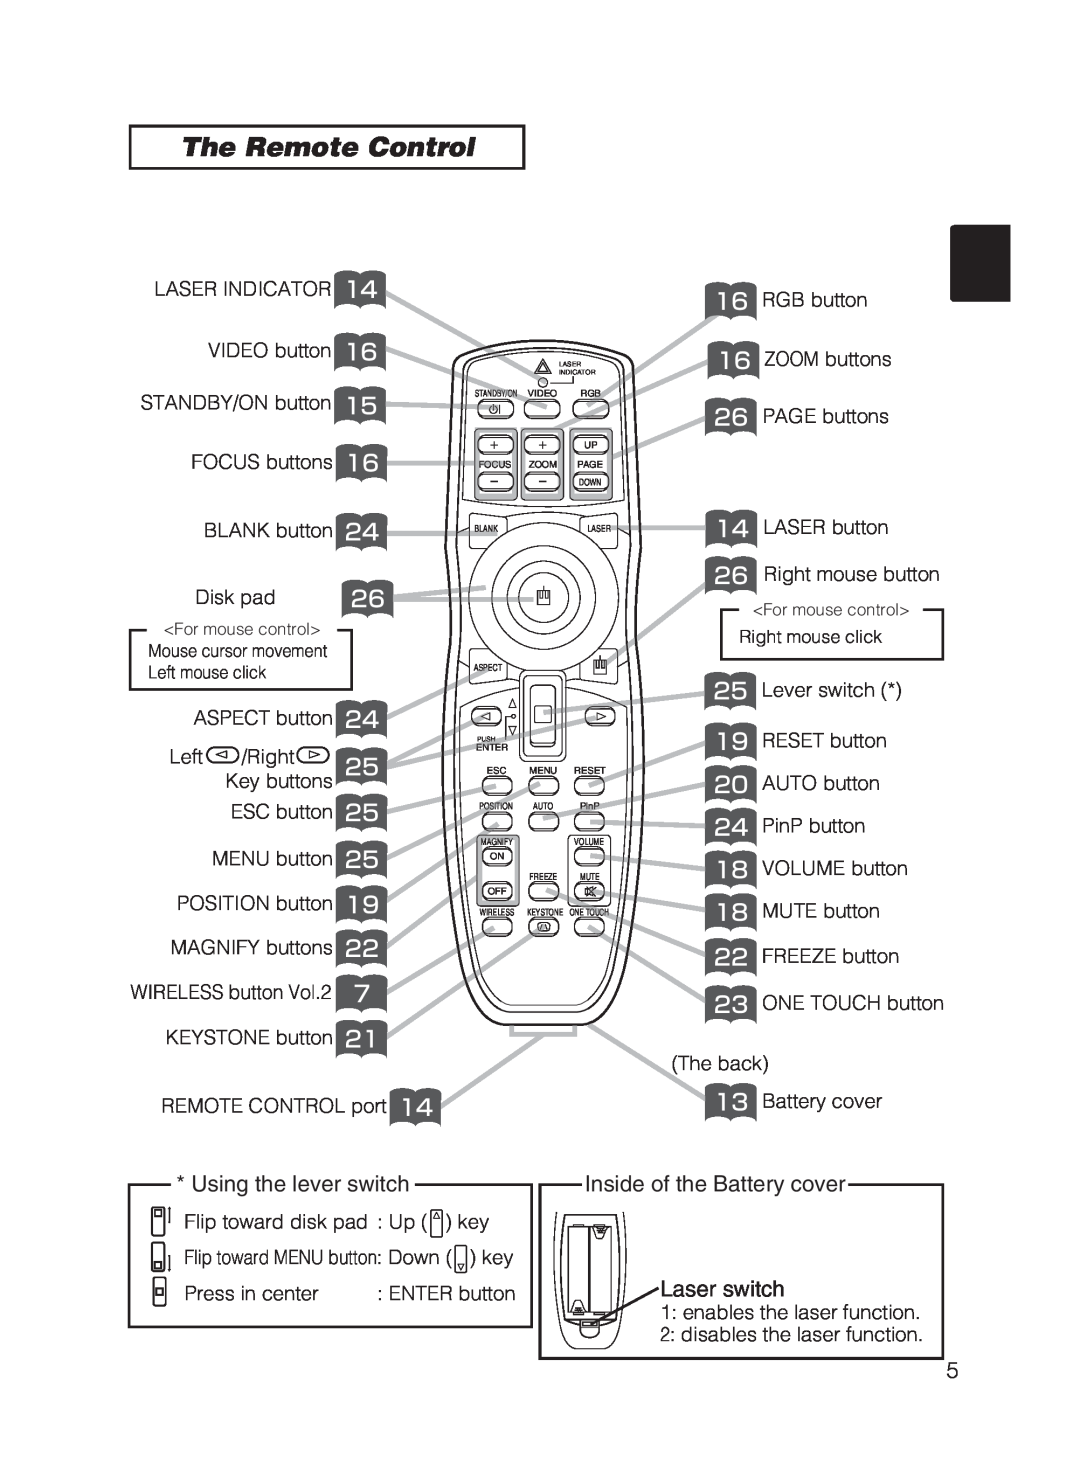 Hitachi CP-X870 user manual The Remote Control, Using the lever switch, Inside of the Battery cover, Laser switch 